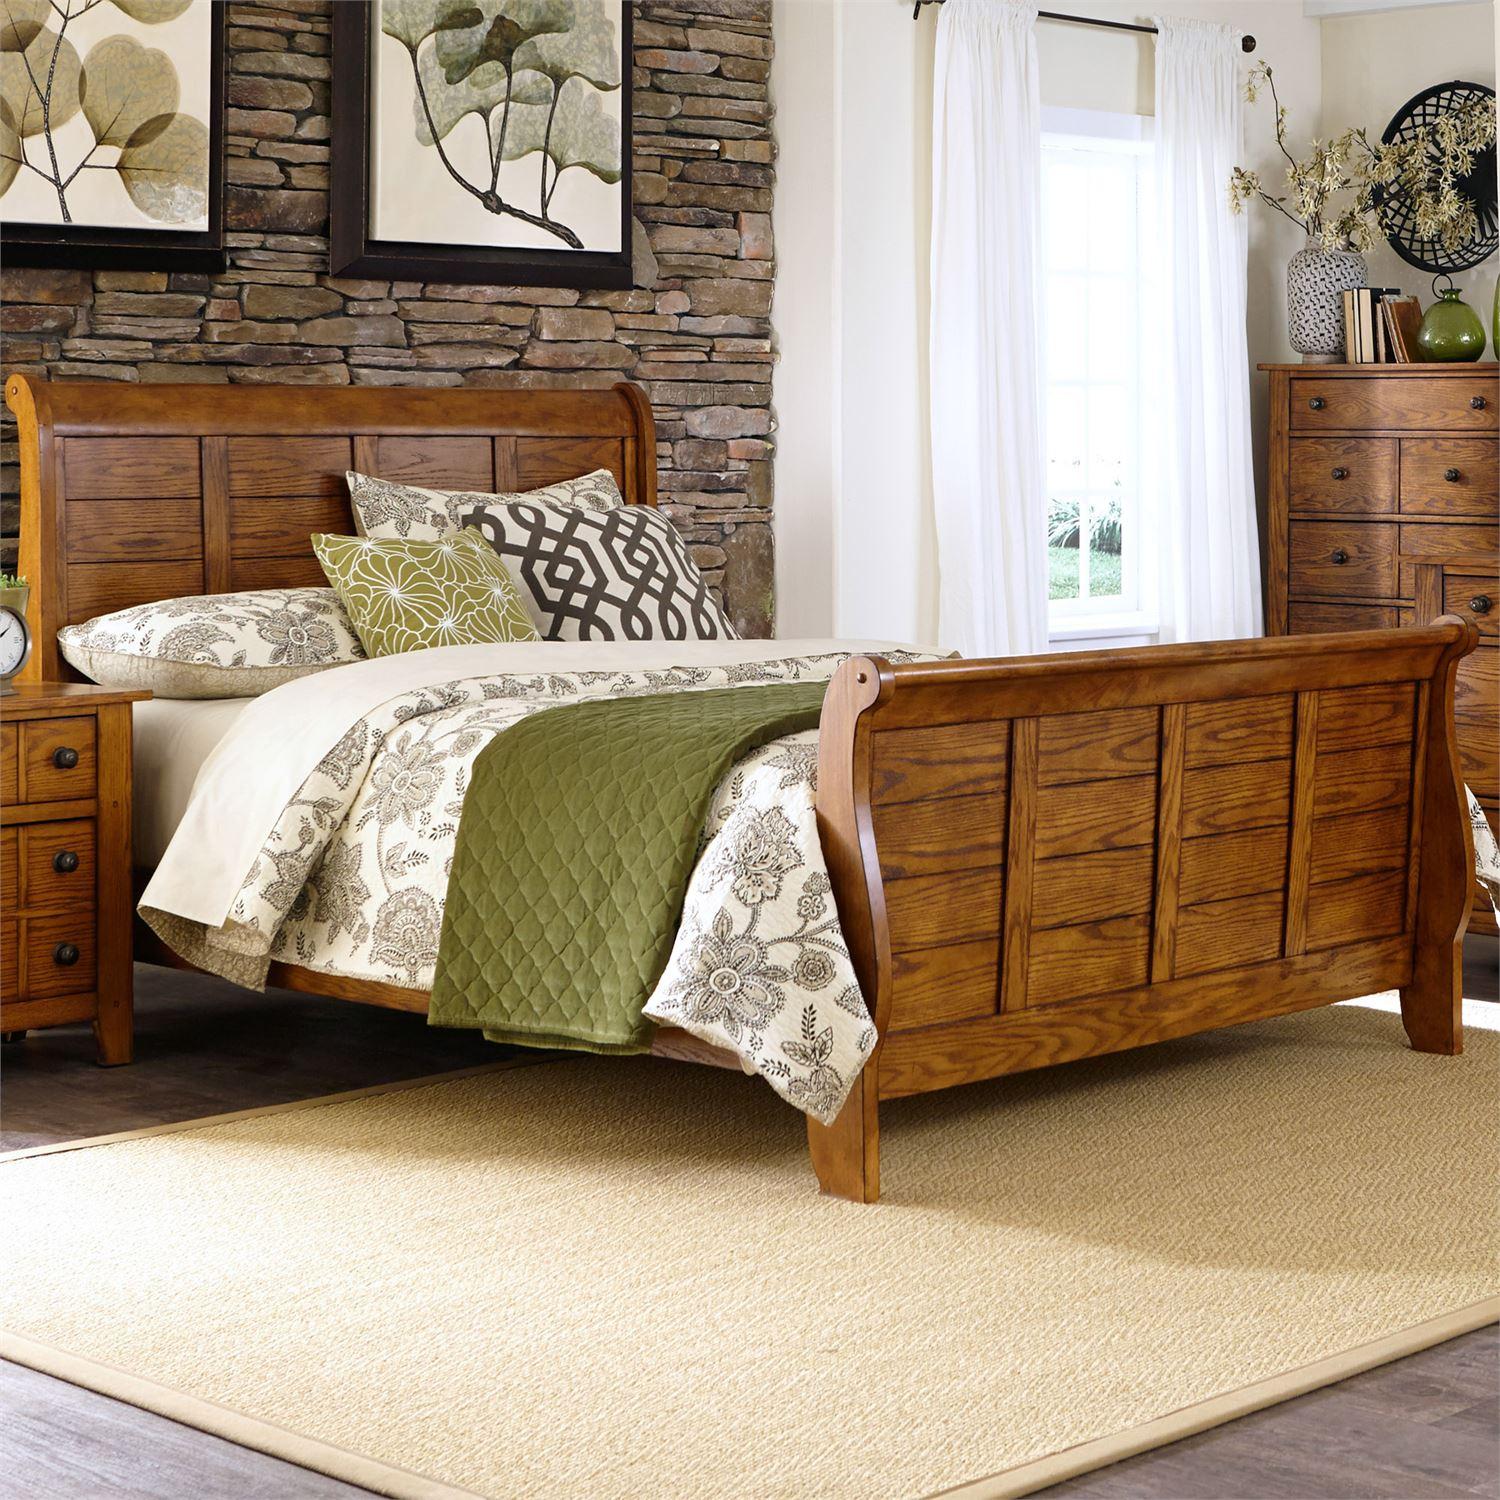 Traditional Sleigh Bed Grandpas Cabin  (175-BR) Sleigh Bed 175-BR-KSL in Oak, Brown Matte Lacquer